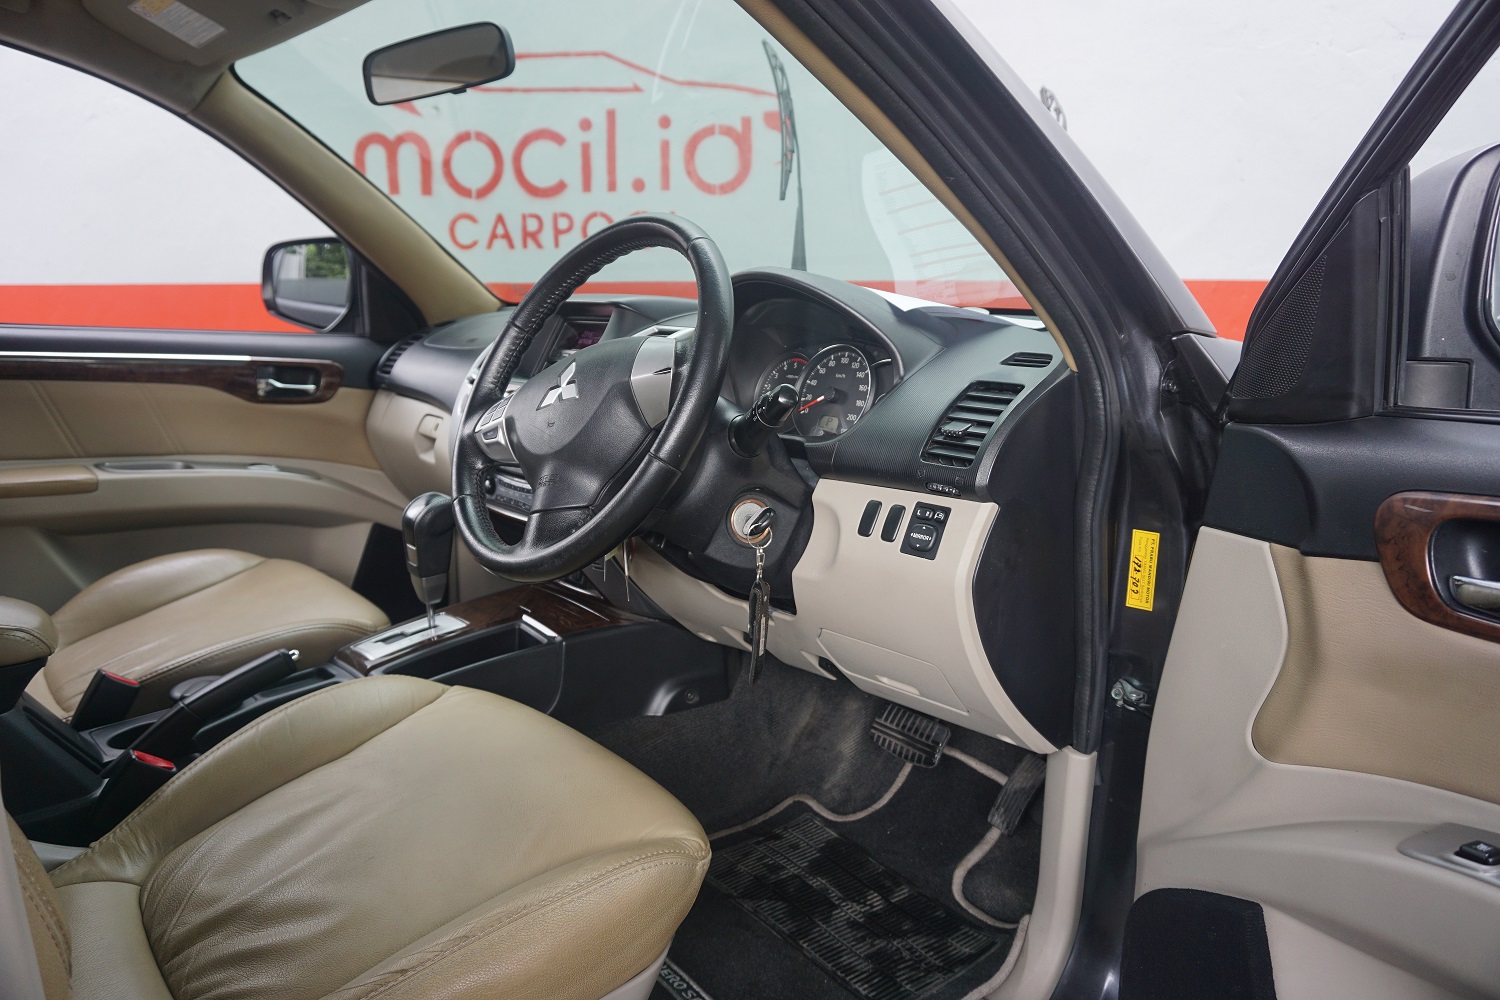 Mobil MITSUBISHI PAJERO SPORT EXCEED A/T 12 mantaap